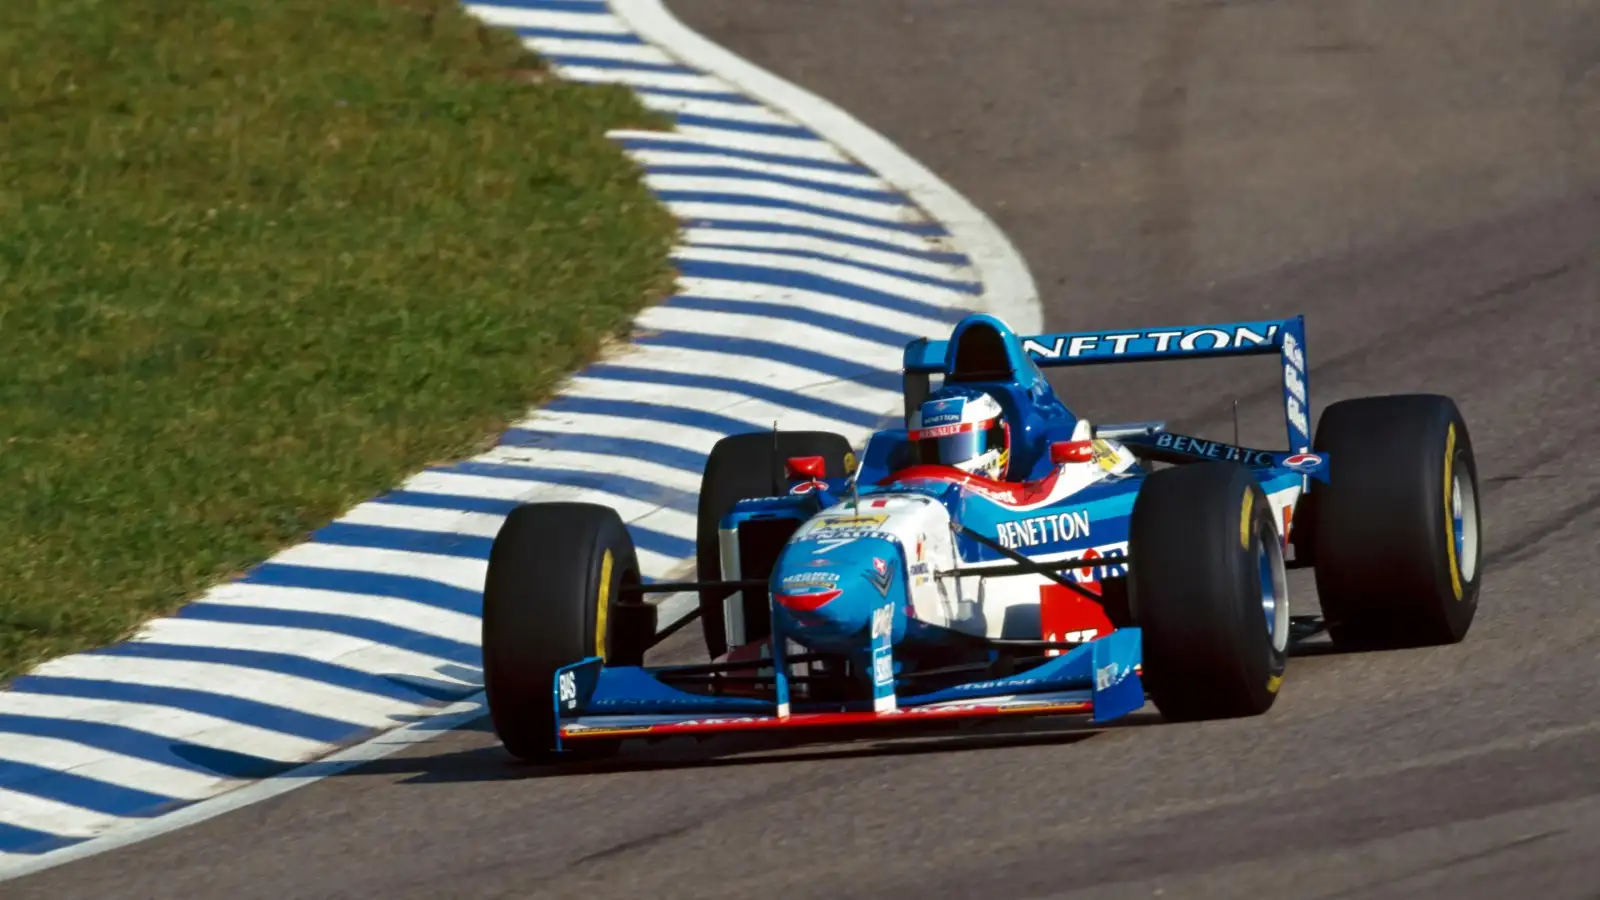 Jean Alesi in action for Benetton, subject of a 1997 documentary